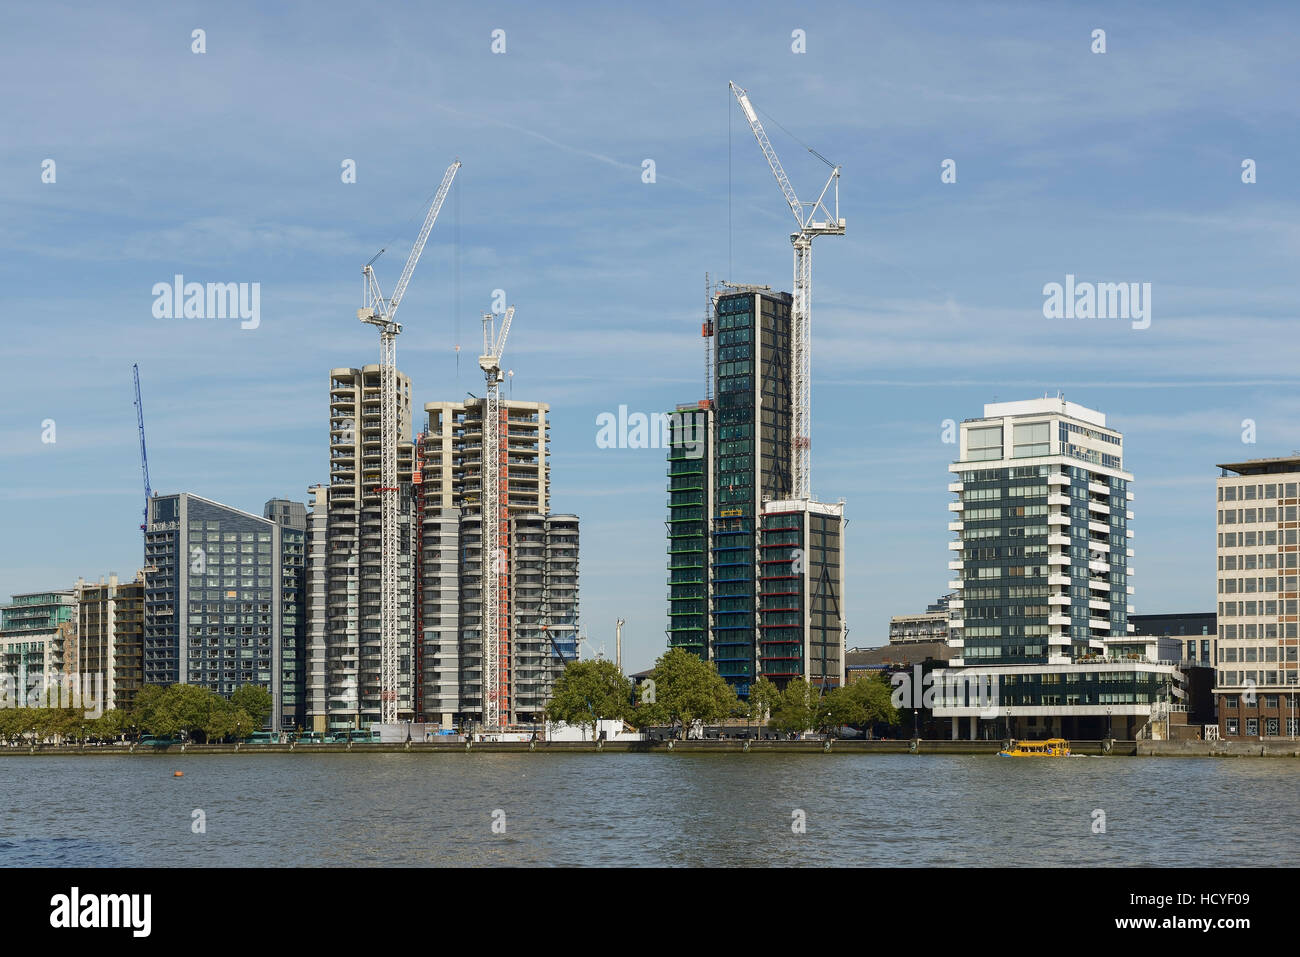 New apartments and tower blocks under construction alongside the RIver Thames in Lambeth London UK Stock Photo